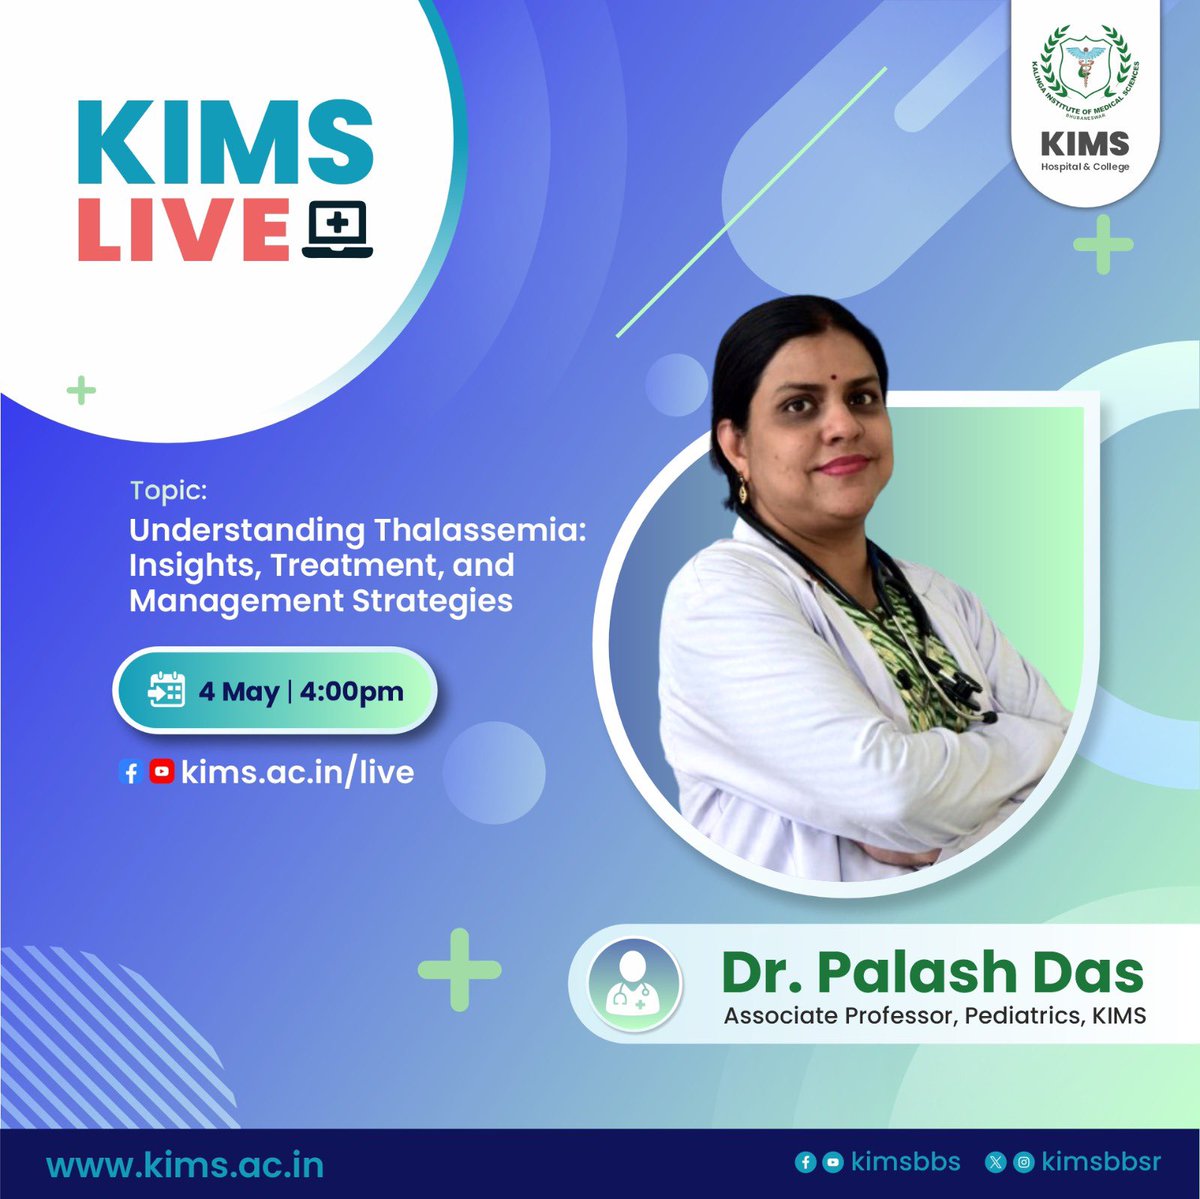 Join us for our next KIMS Live session this Saturday! We're thrilled to welcome our pediatric expert who will be shedding light on a crucial topic: “Understanding Thalassemia: Insights, Treatment, and Management Strategies”. Don’t miss out on this opportunity to gain valuable